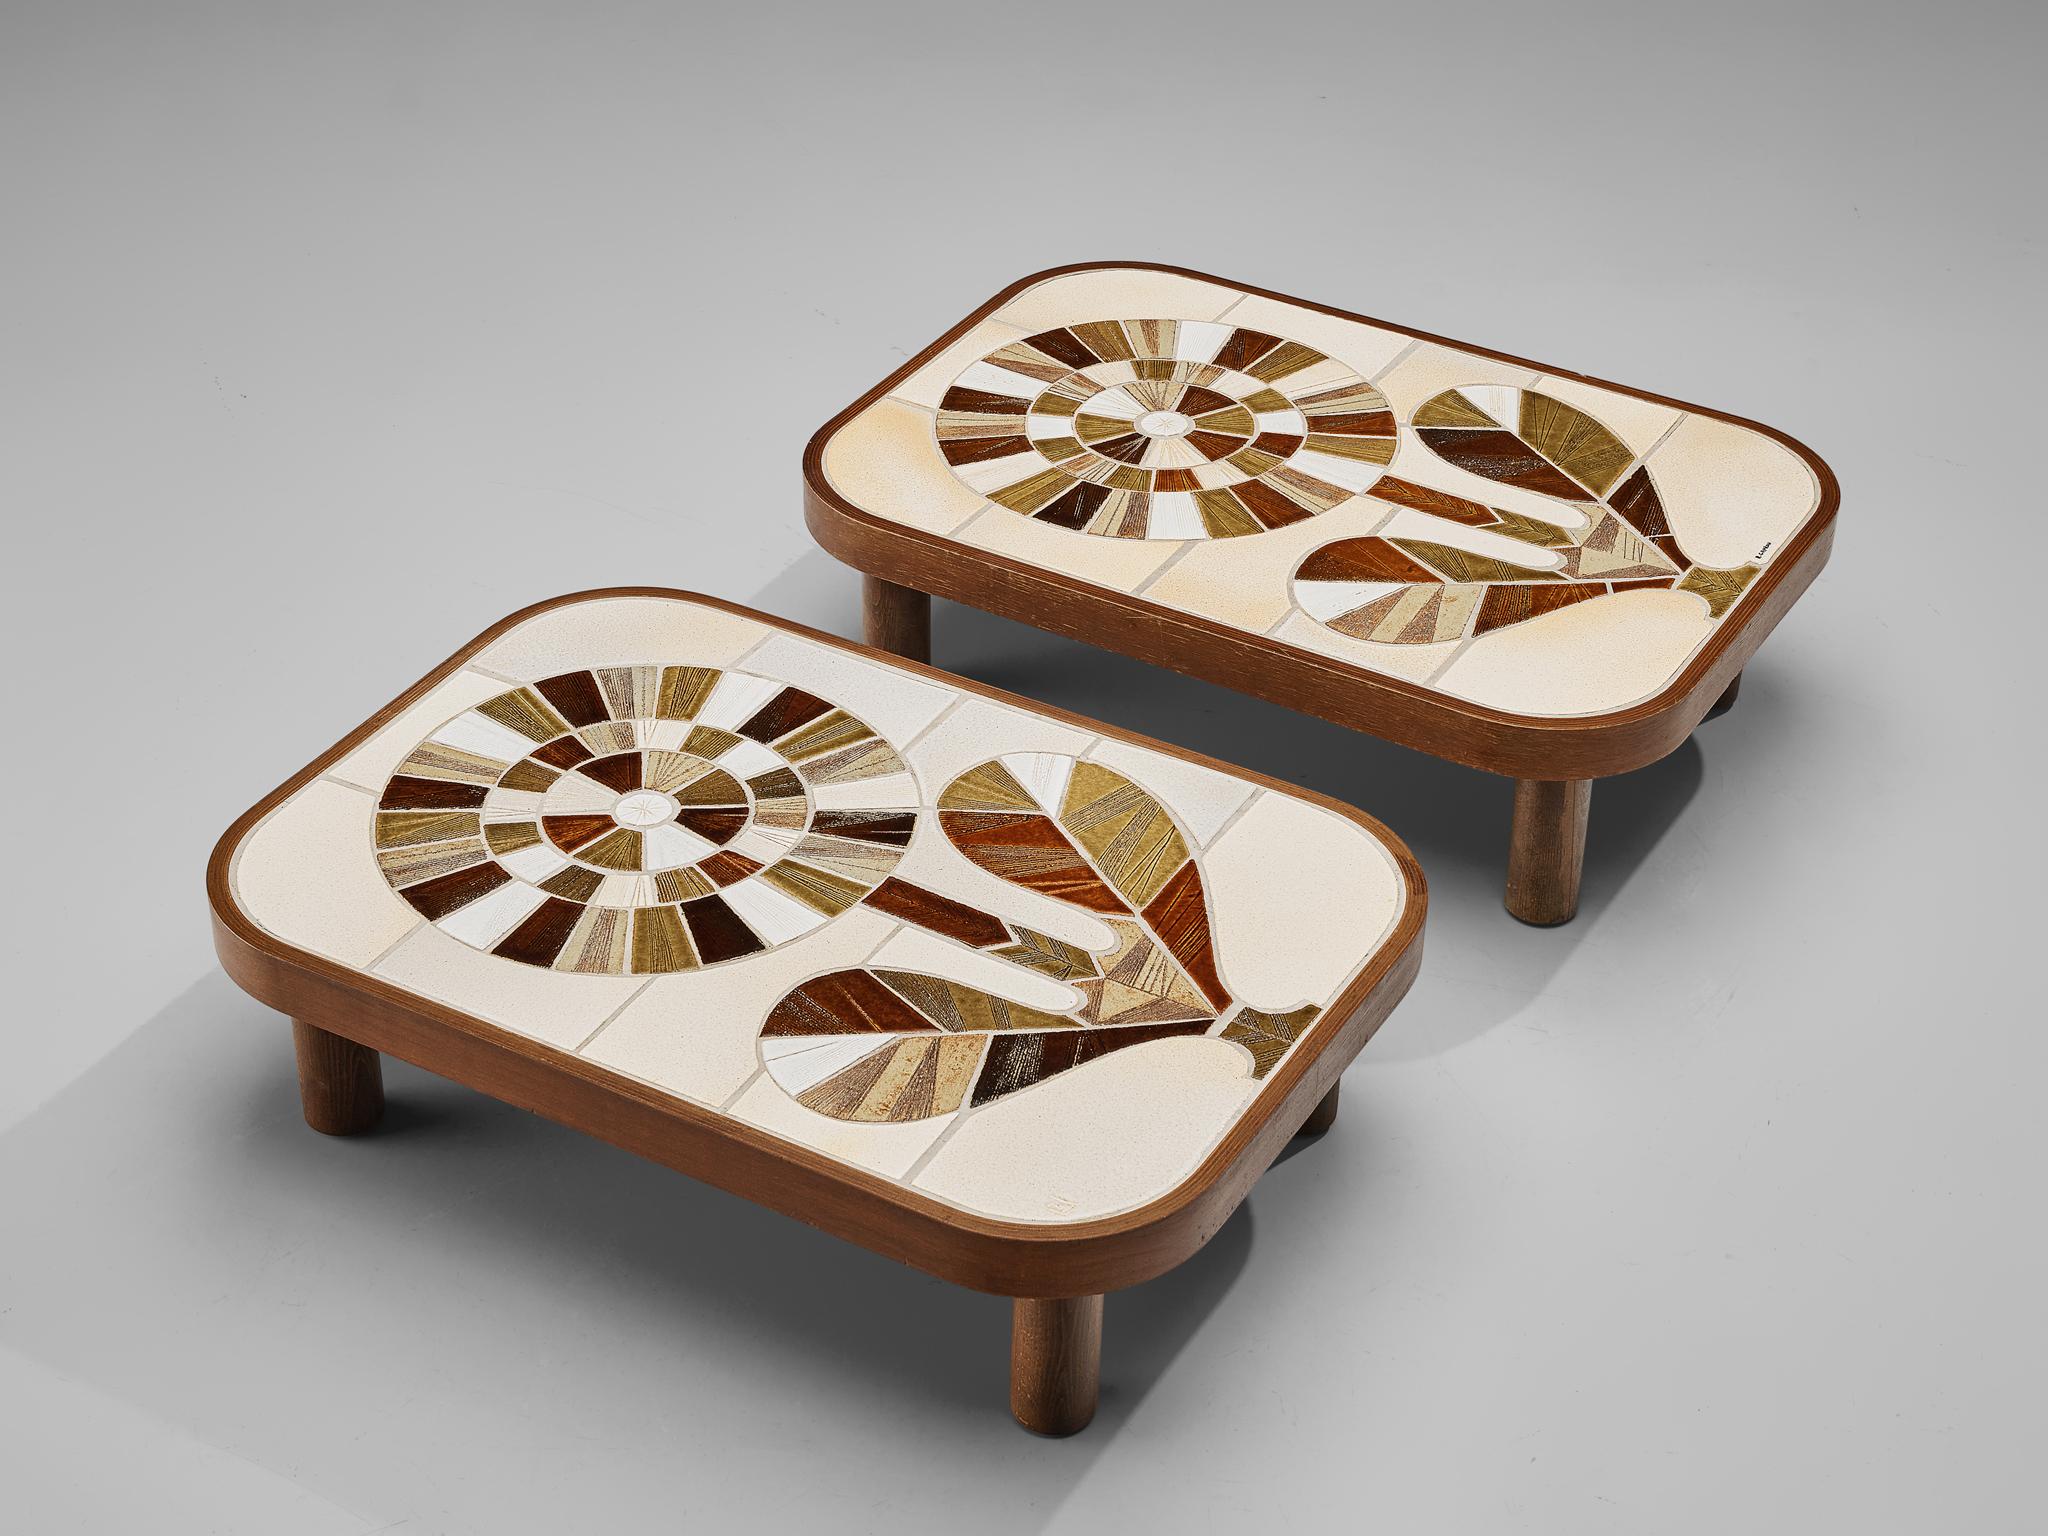 Roger Capron, coffee tables, ceramic, wood, France, 1960s 

French coffee tables with wonderful composed ceramic tiles by French ceramic artist Roger Capron. Both tables feature a vibrant motif of a flower created by differently colored fragments. A